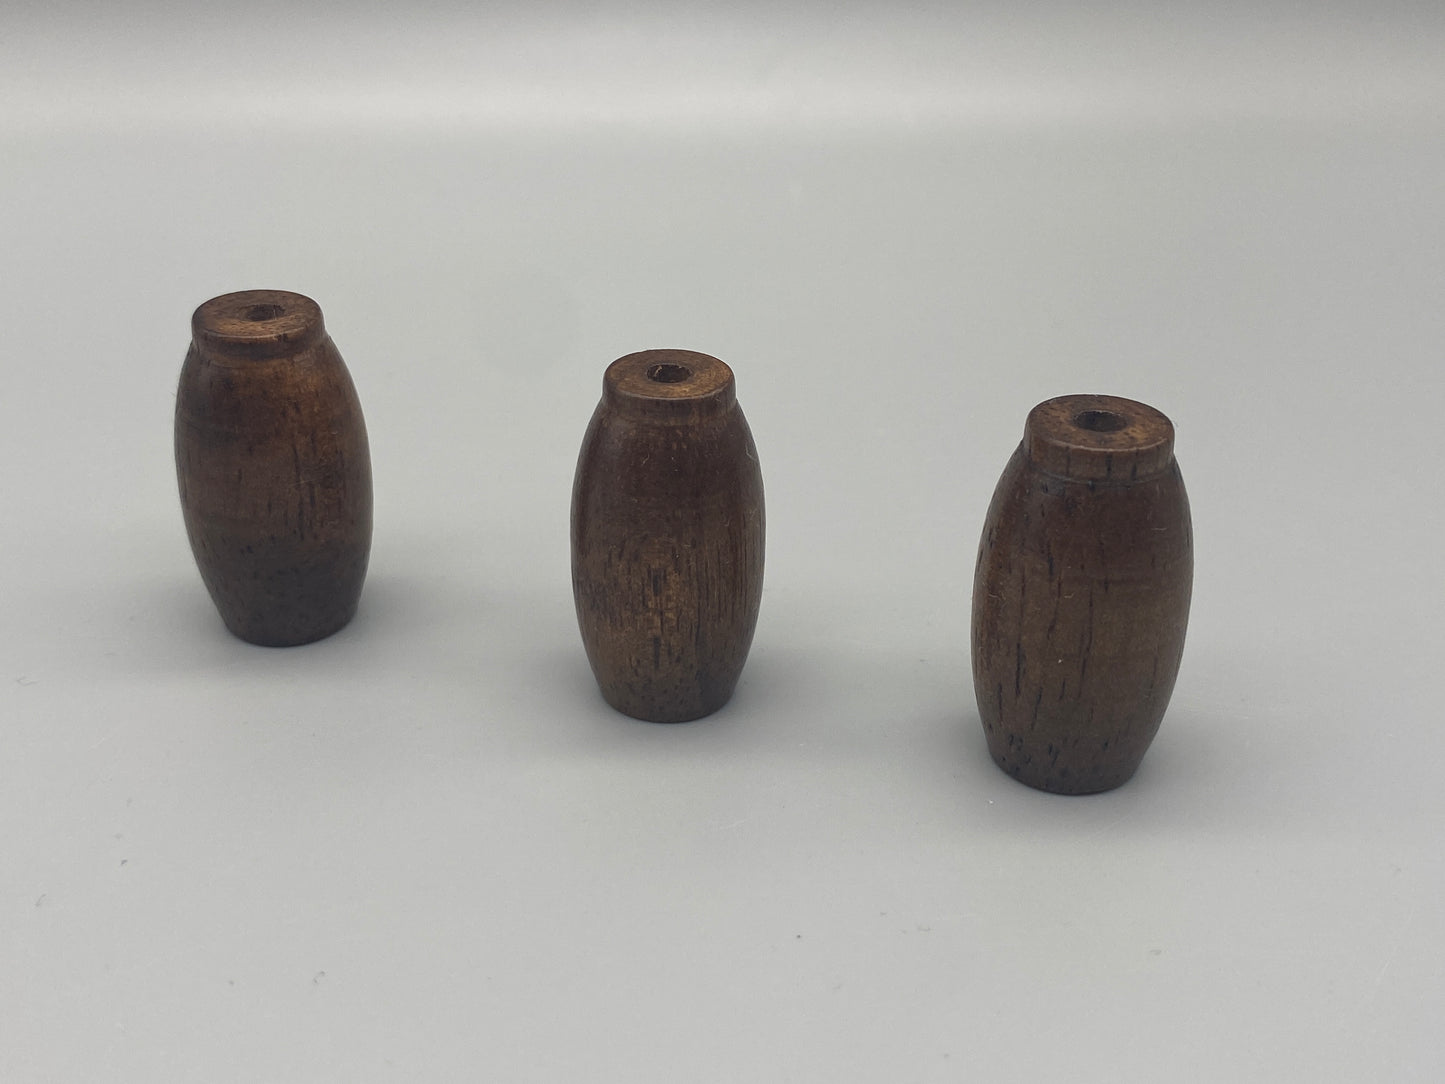 Wooden Blinds Acorns - Cord Pull / Light Cord Pull  - Walnut - Pack of 3